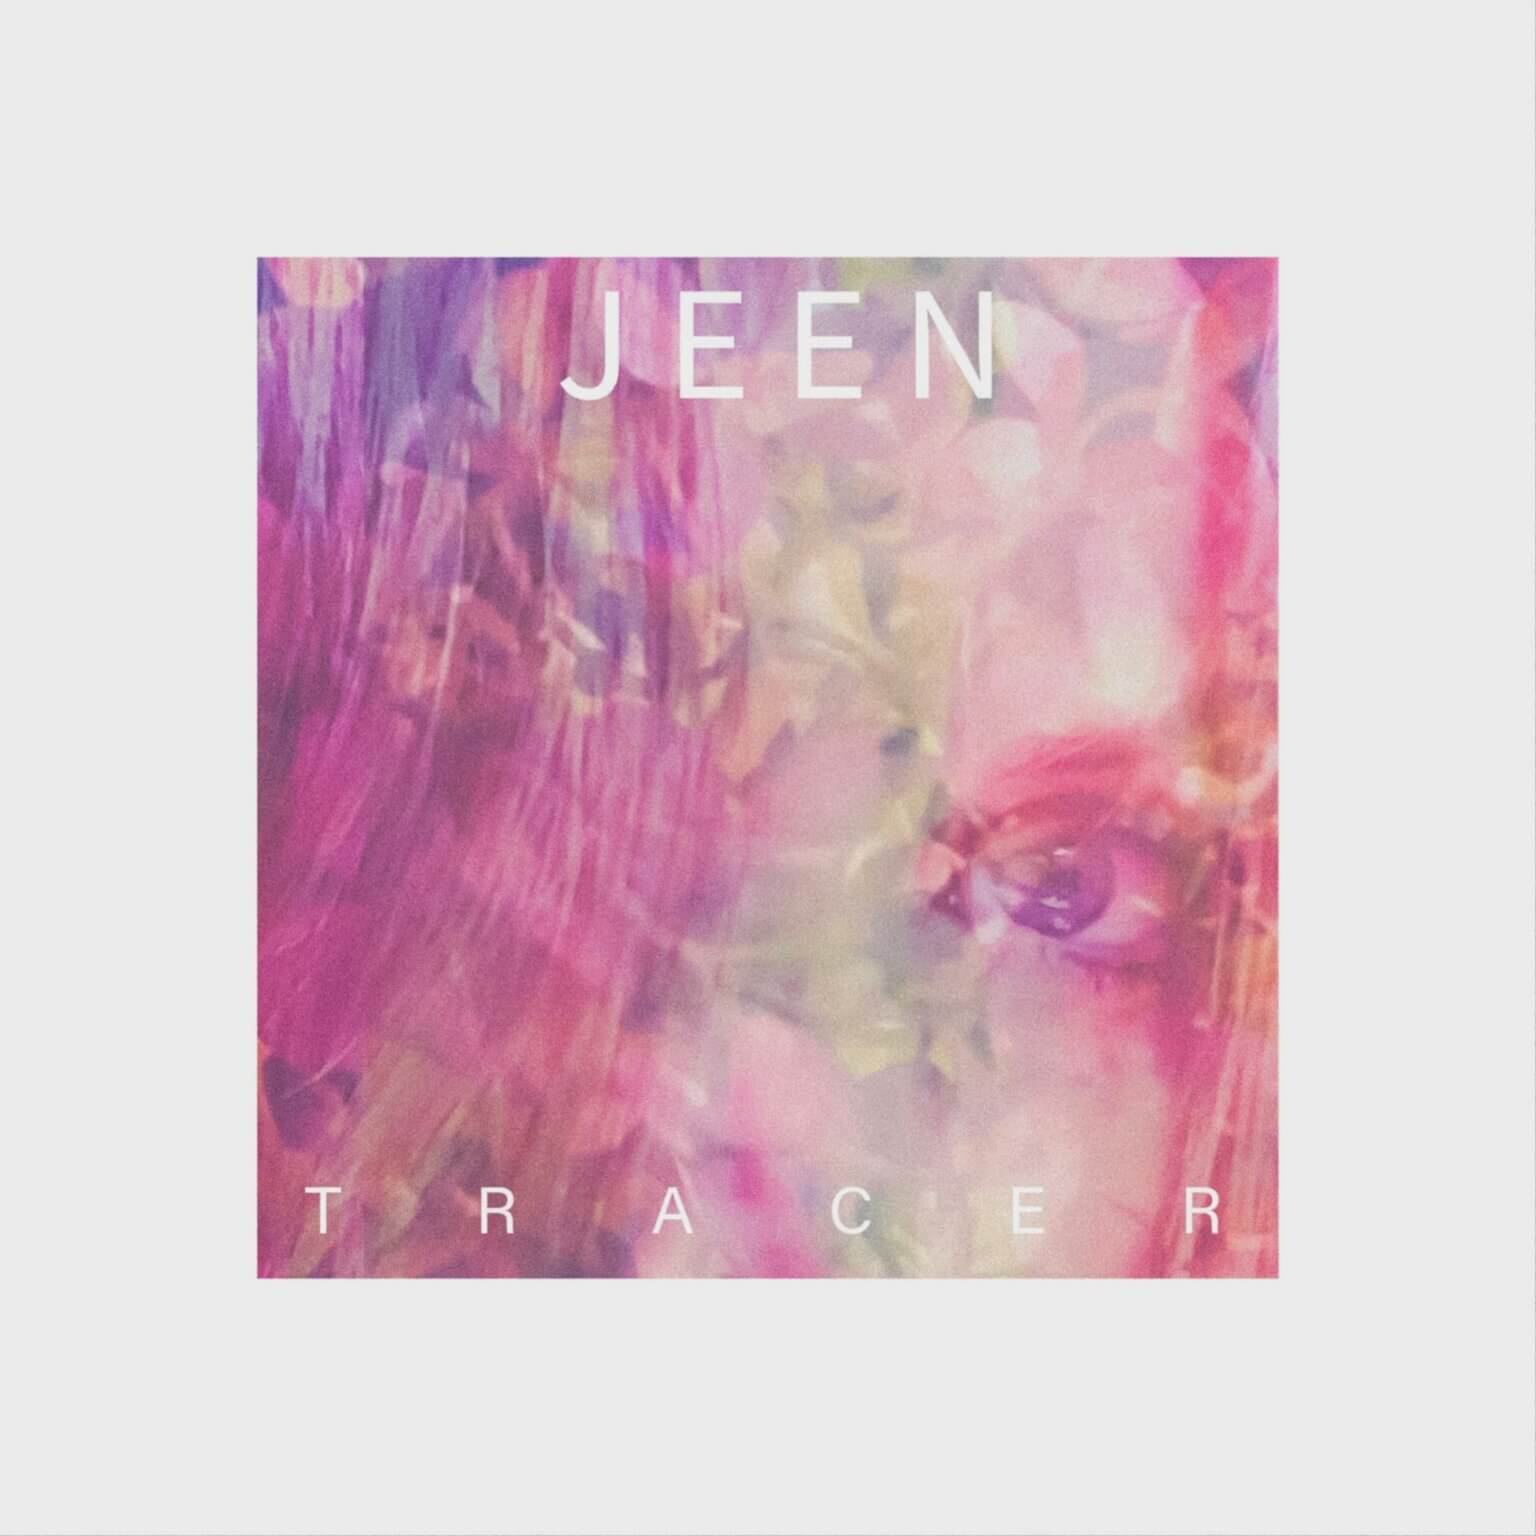 “Chemical Emotion” by Jeen is Northern Transmissions Song of the Day. The Toronto artist's single is off their album Tracer, available 10/21